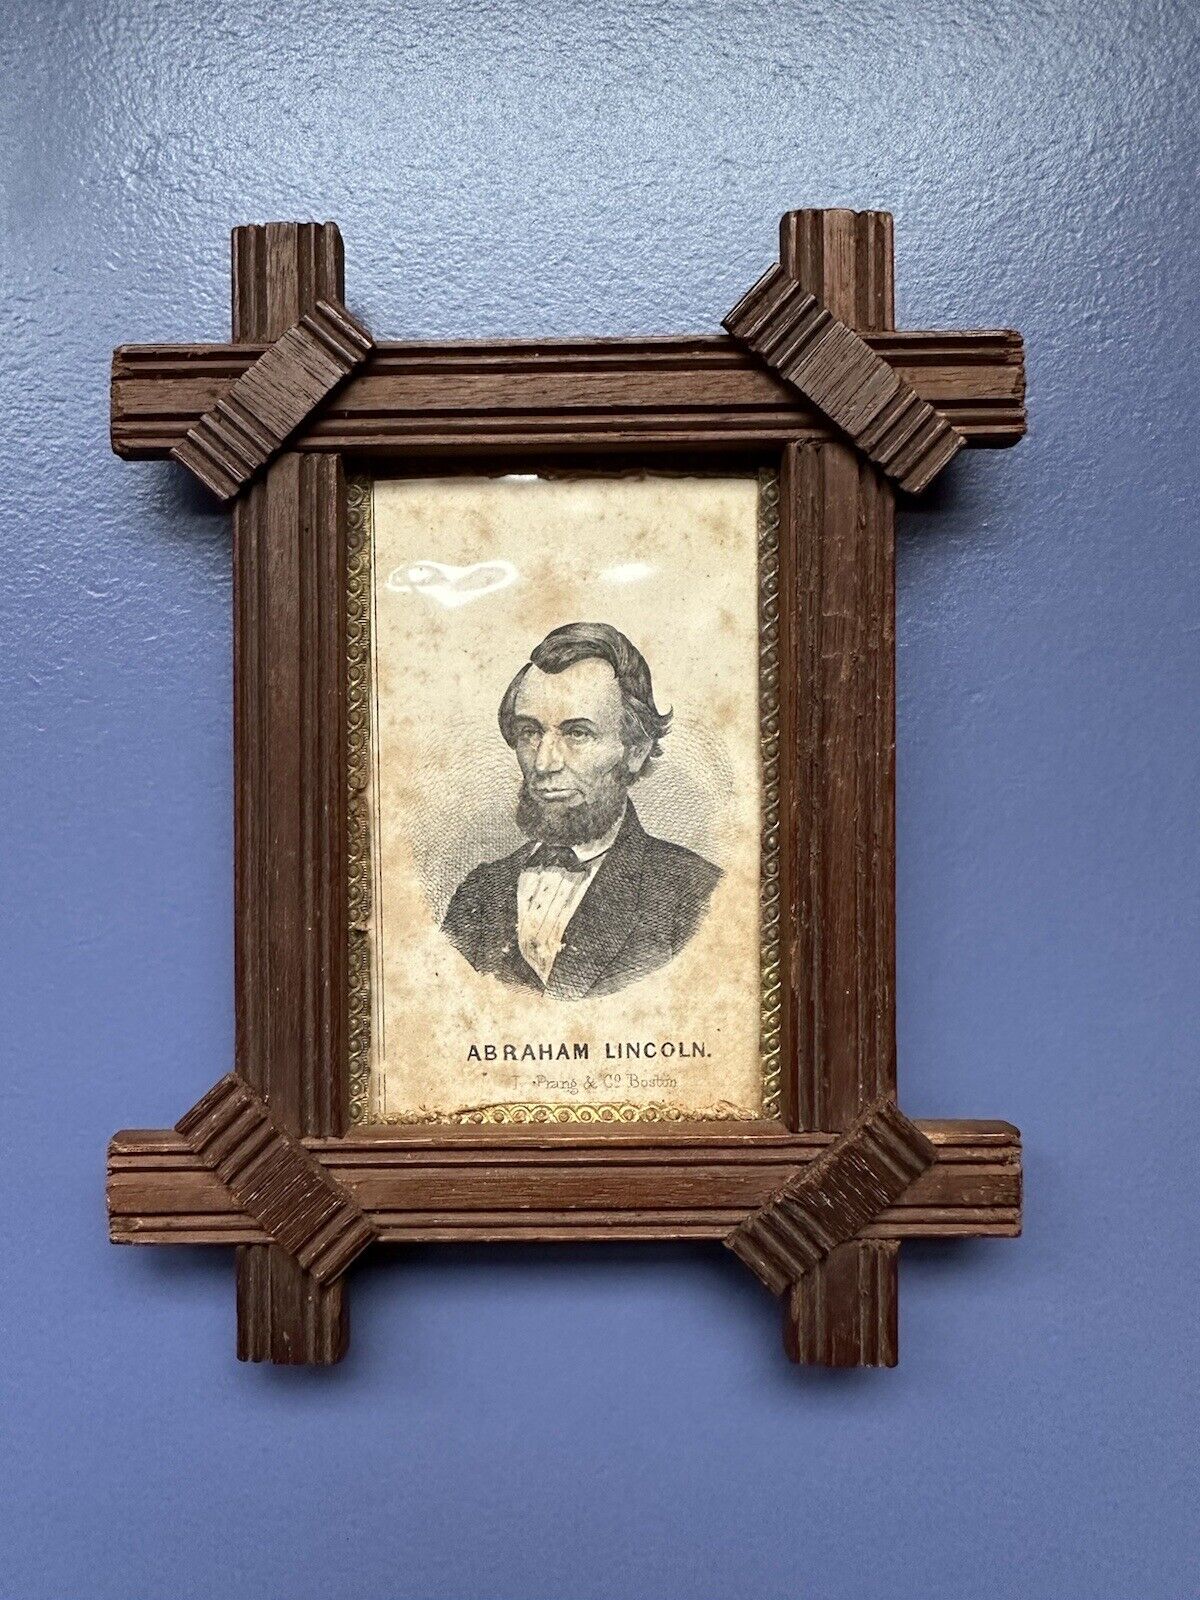 1861 Abraham Lincoln first-year print Louis Prang & Co. Boston lithographic card